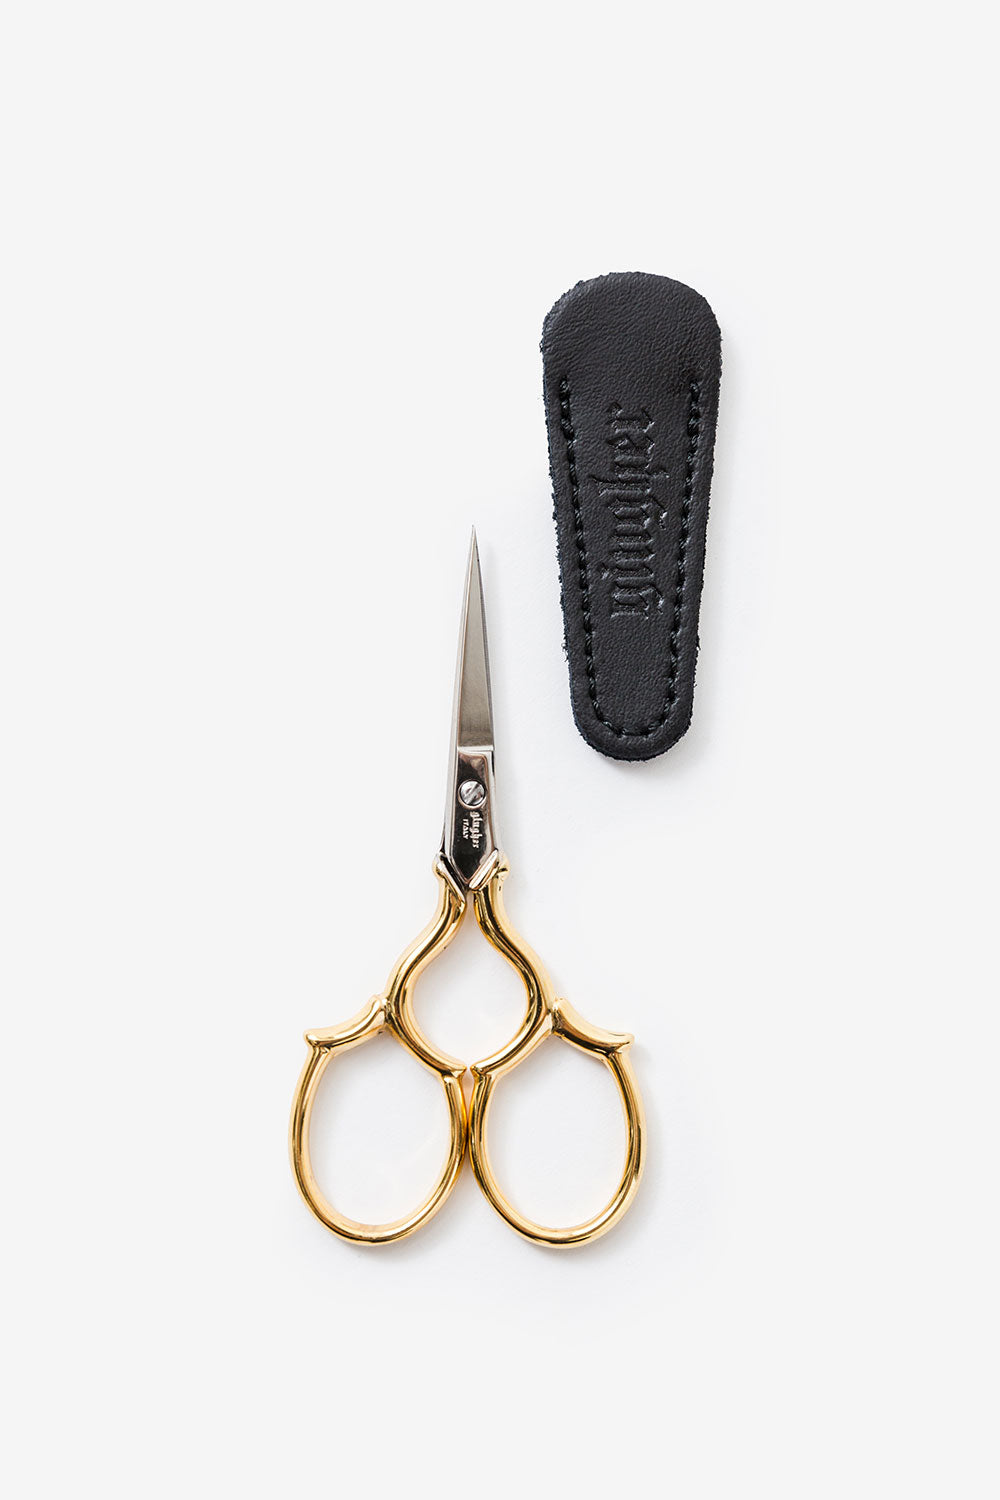 Solingen 3.5 Gold Plated Scallop Heart Embroidery Scissor - Made